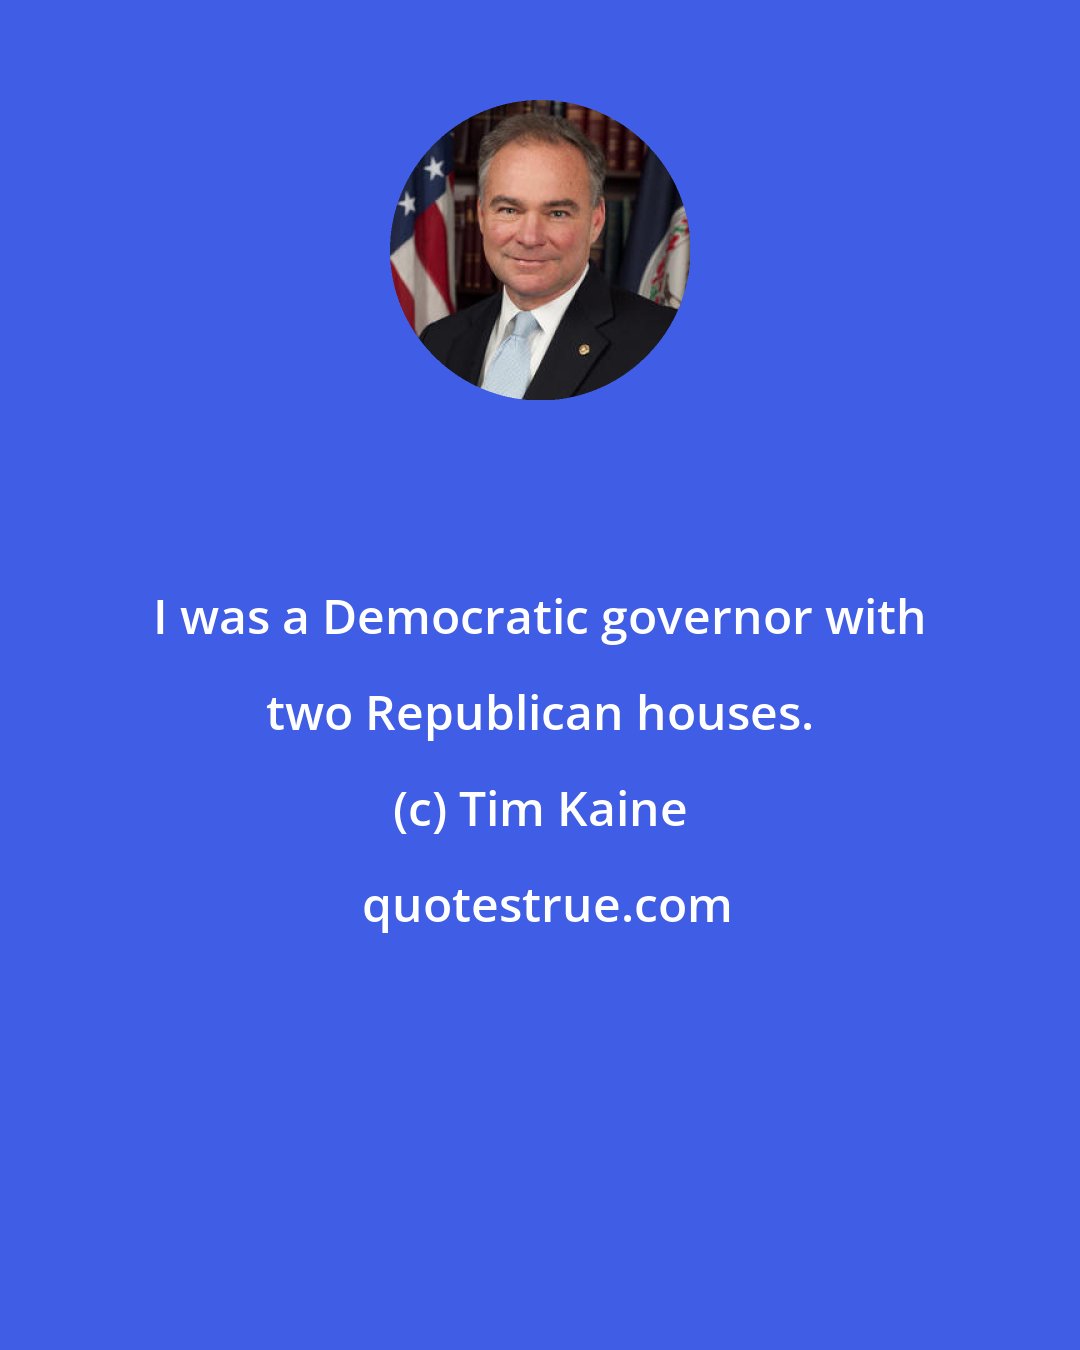 Tim Kaine: I was a Democratic governor with two Republican houses.